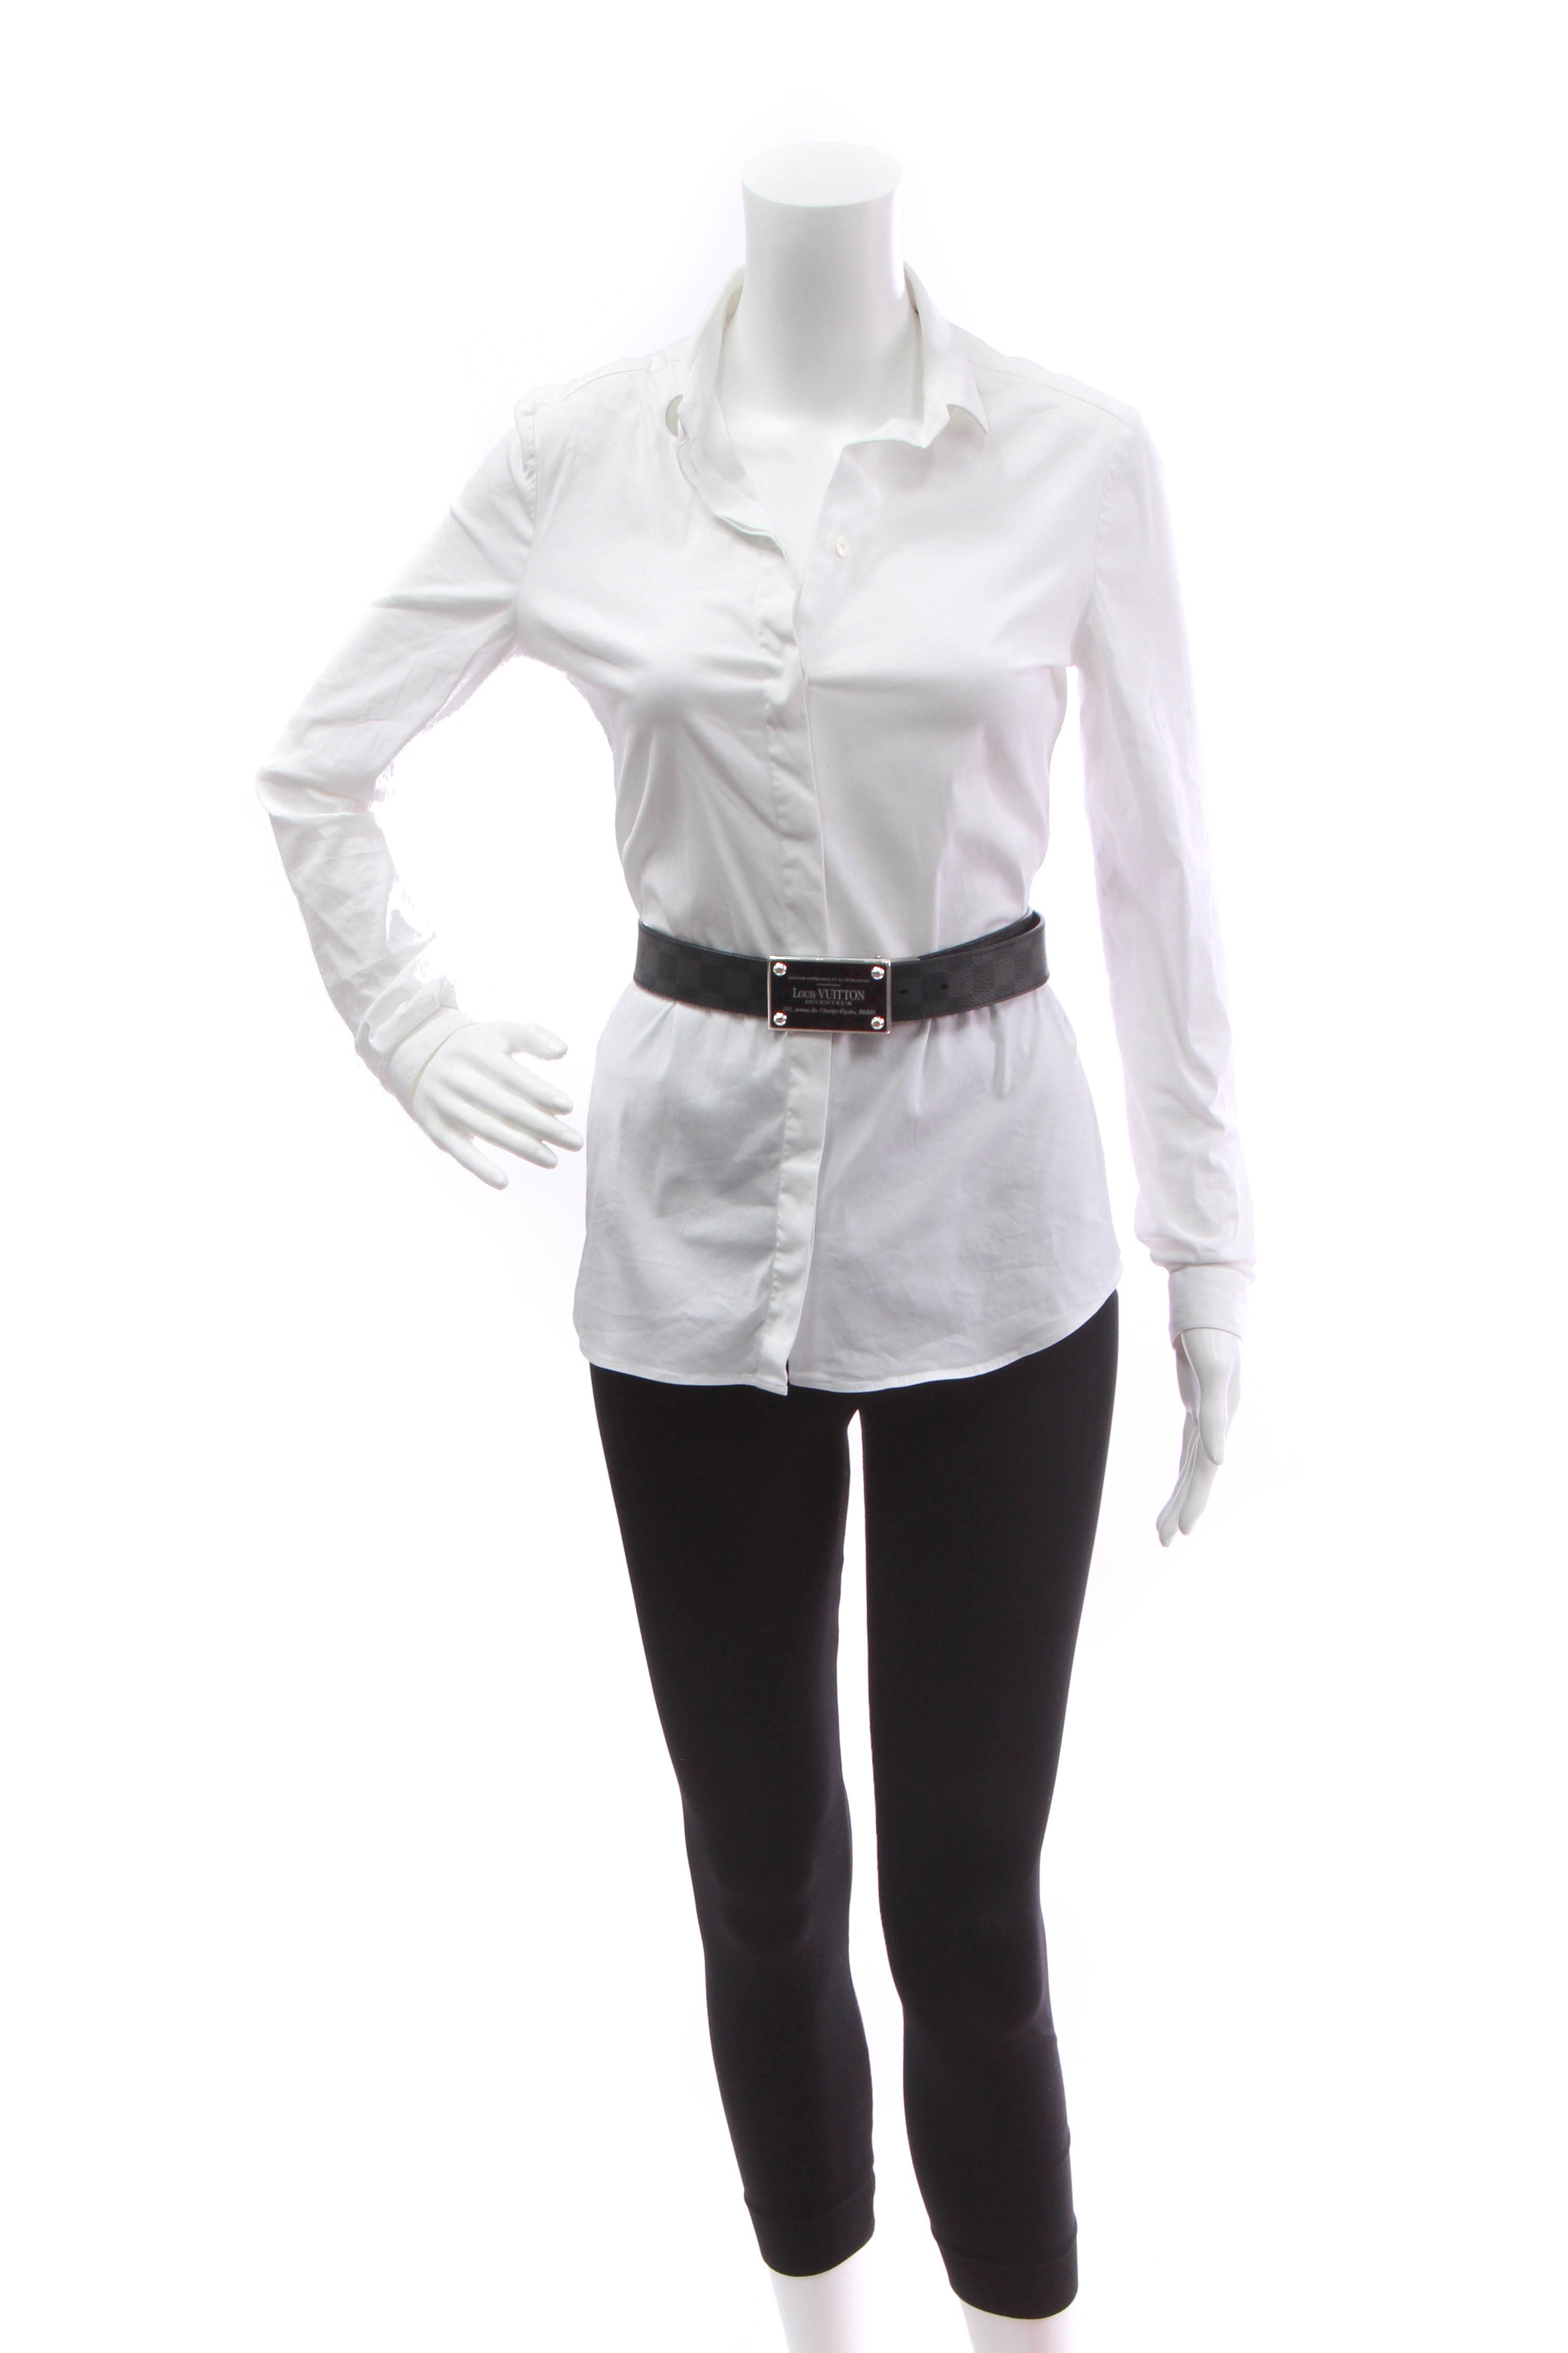 Louis Vuitton White Long Sleeve Shirt Luxembourg, SAVE 46